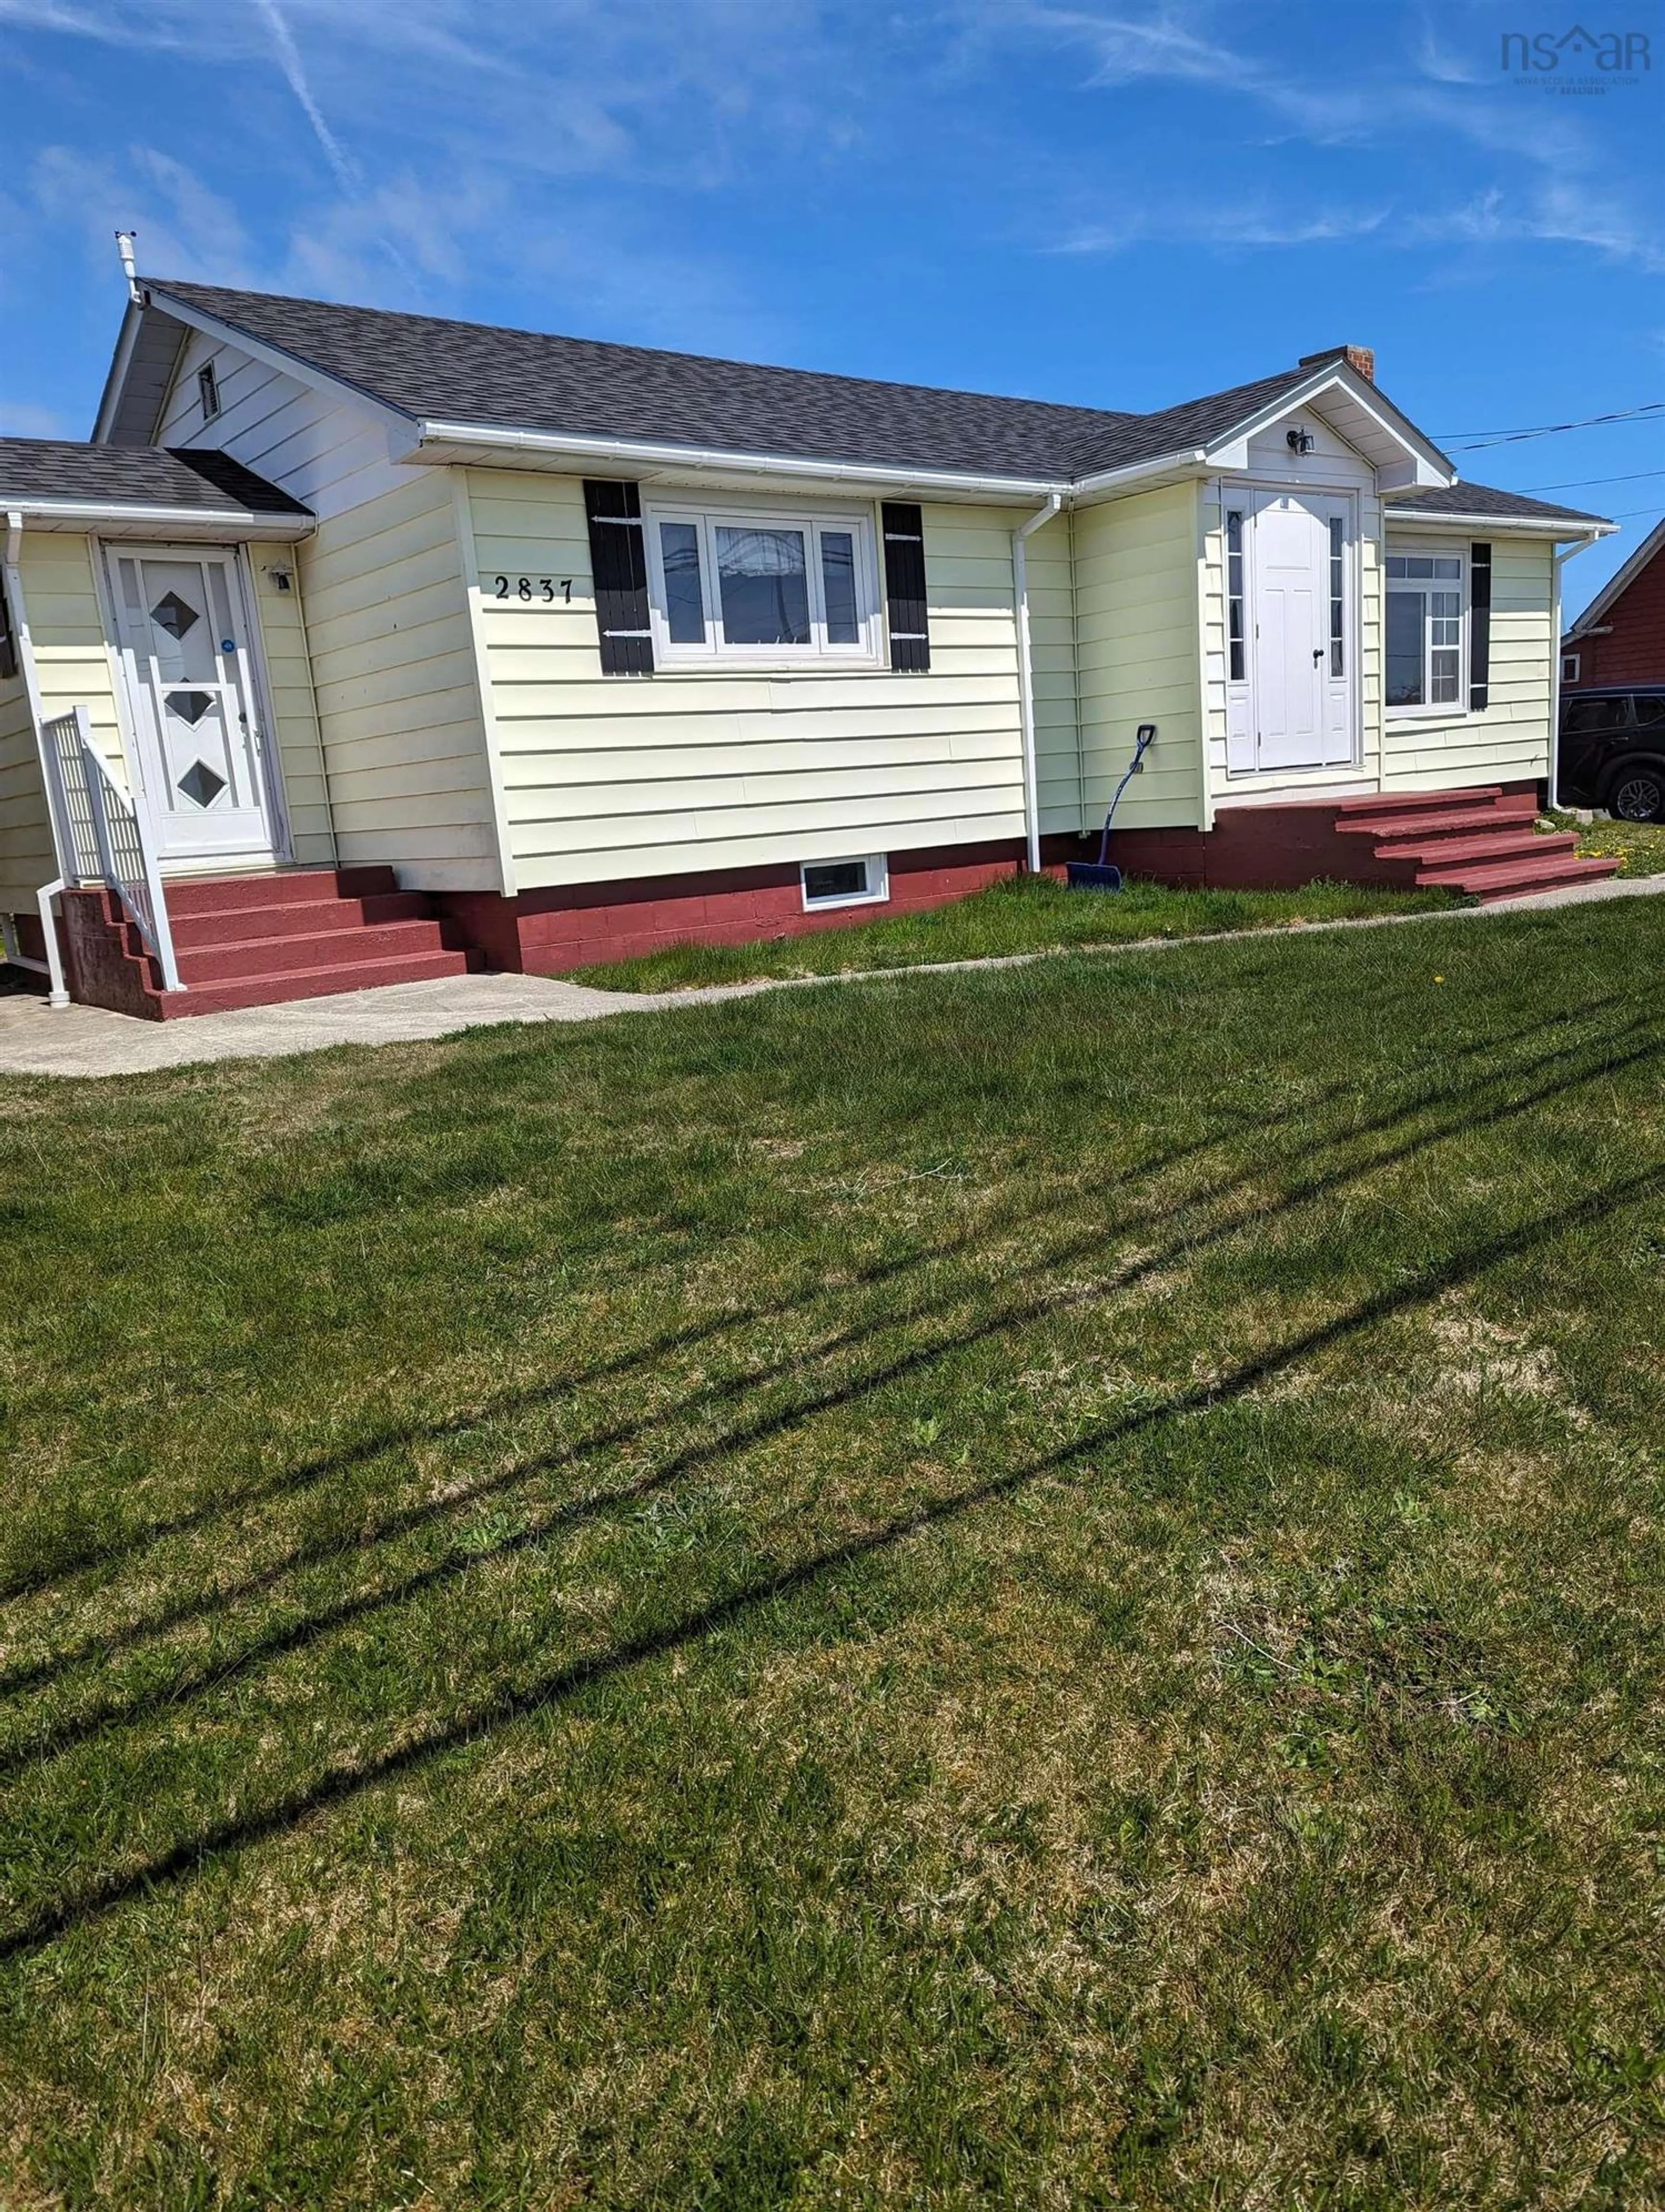 Frontside or backside of a home for 2837 Main St, Clark's Harbour Nova Scotia B0W 1P0